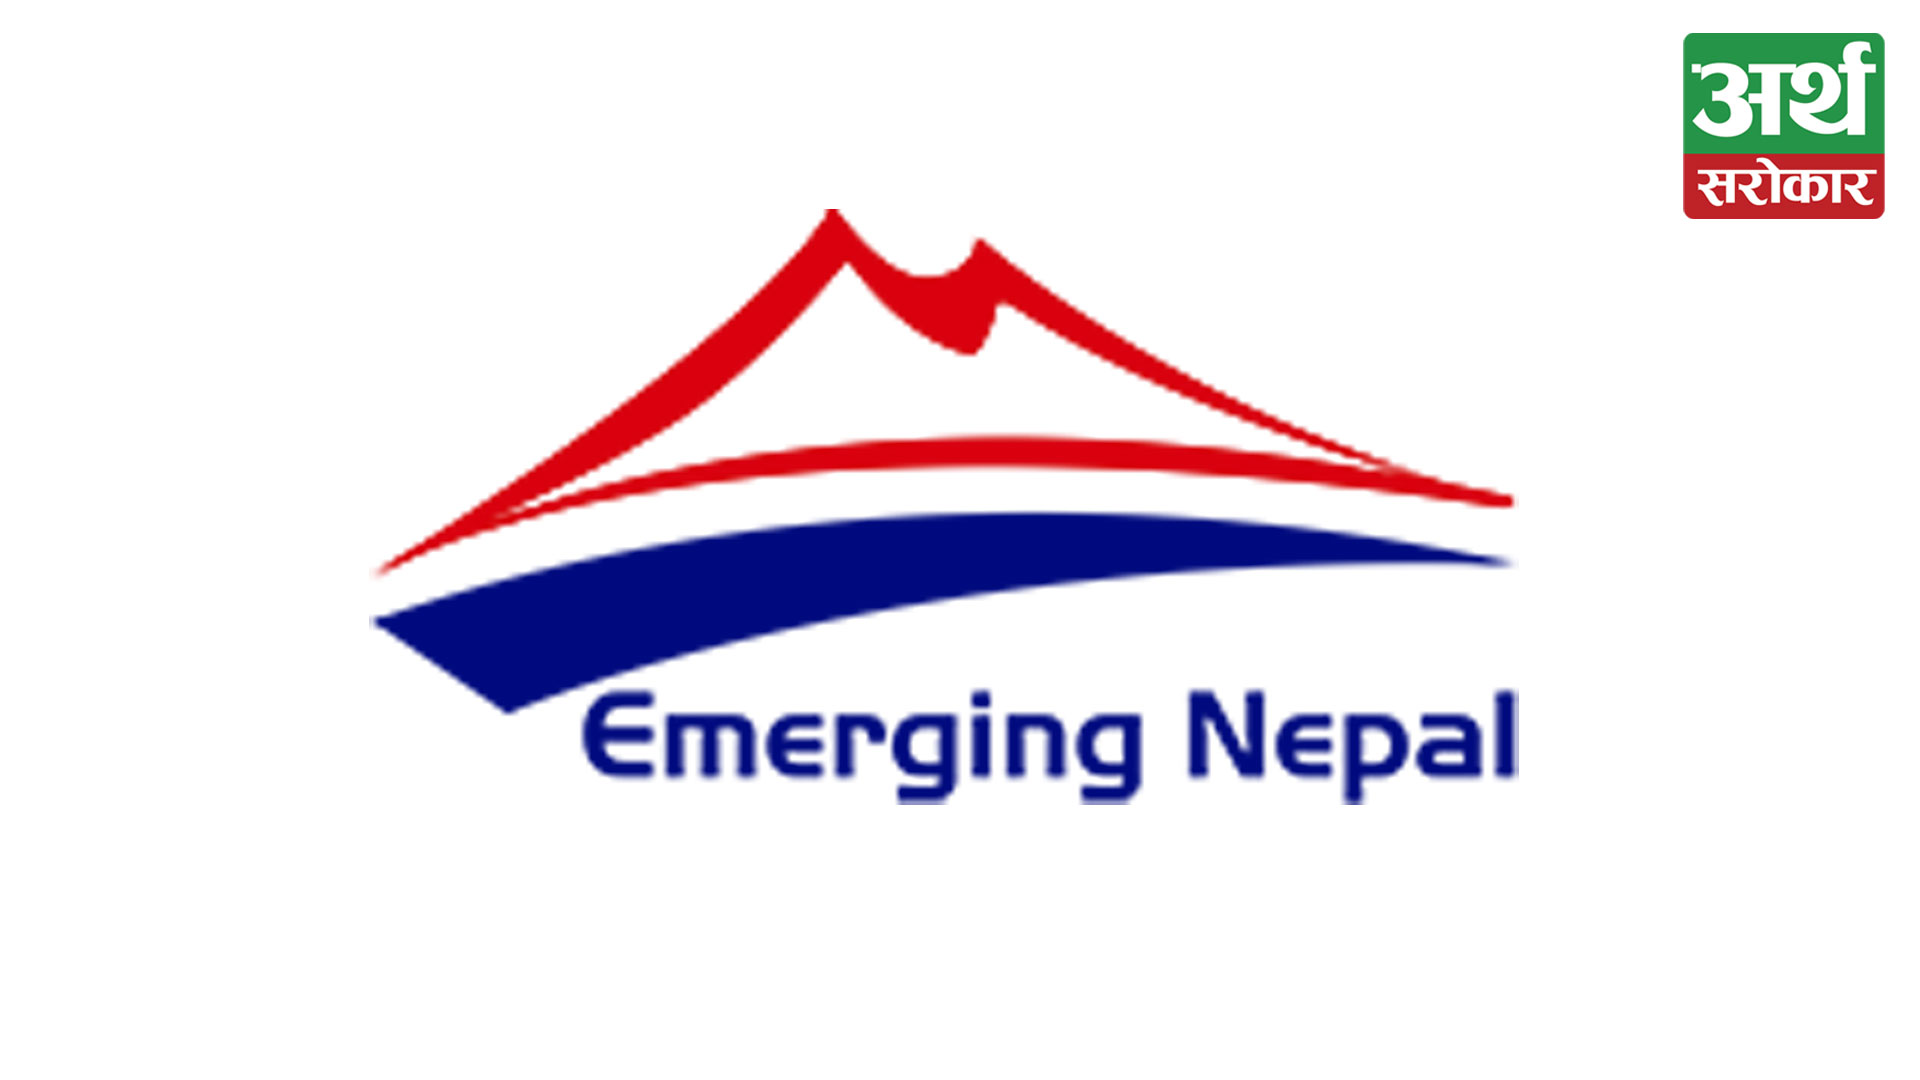 Emerging Nepal will distribute an 8.42 percent dividend to its shareholders